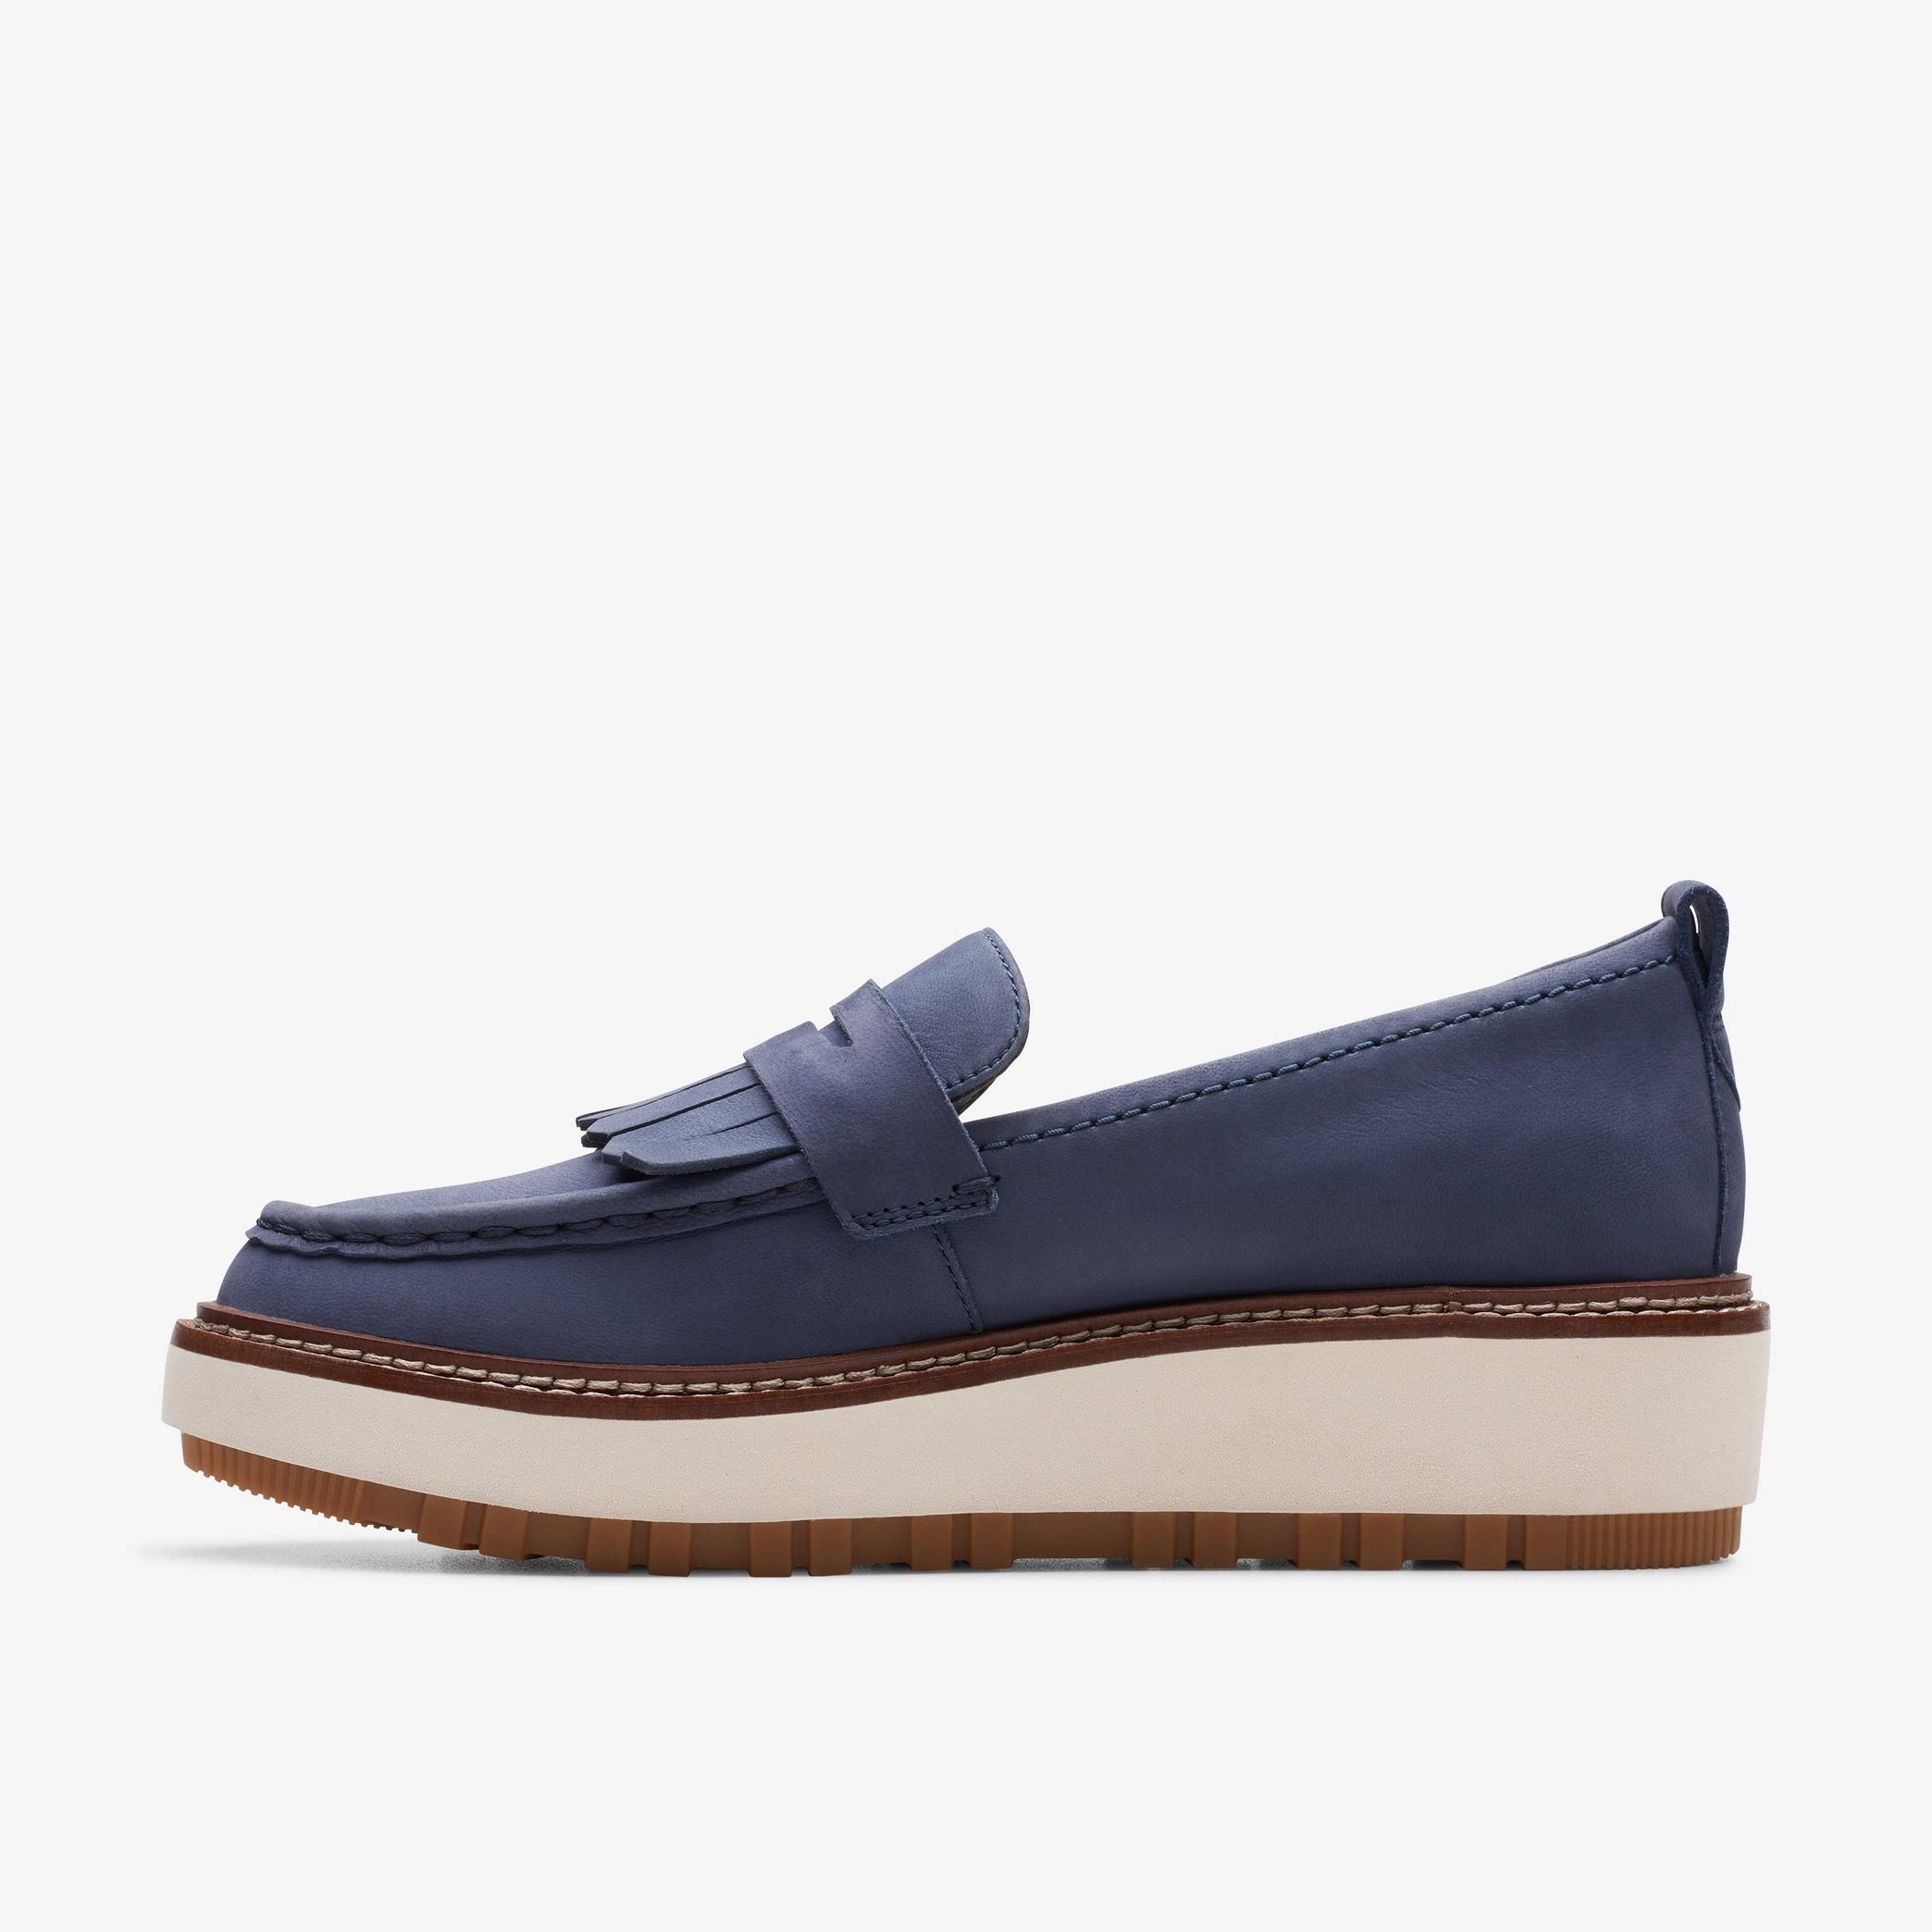 Orianna Loafer Navy Nubuck Loafers, view 4 of 11